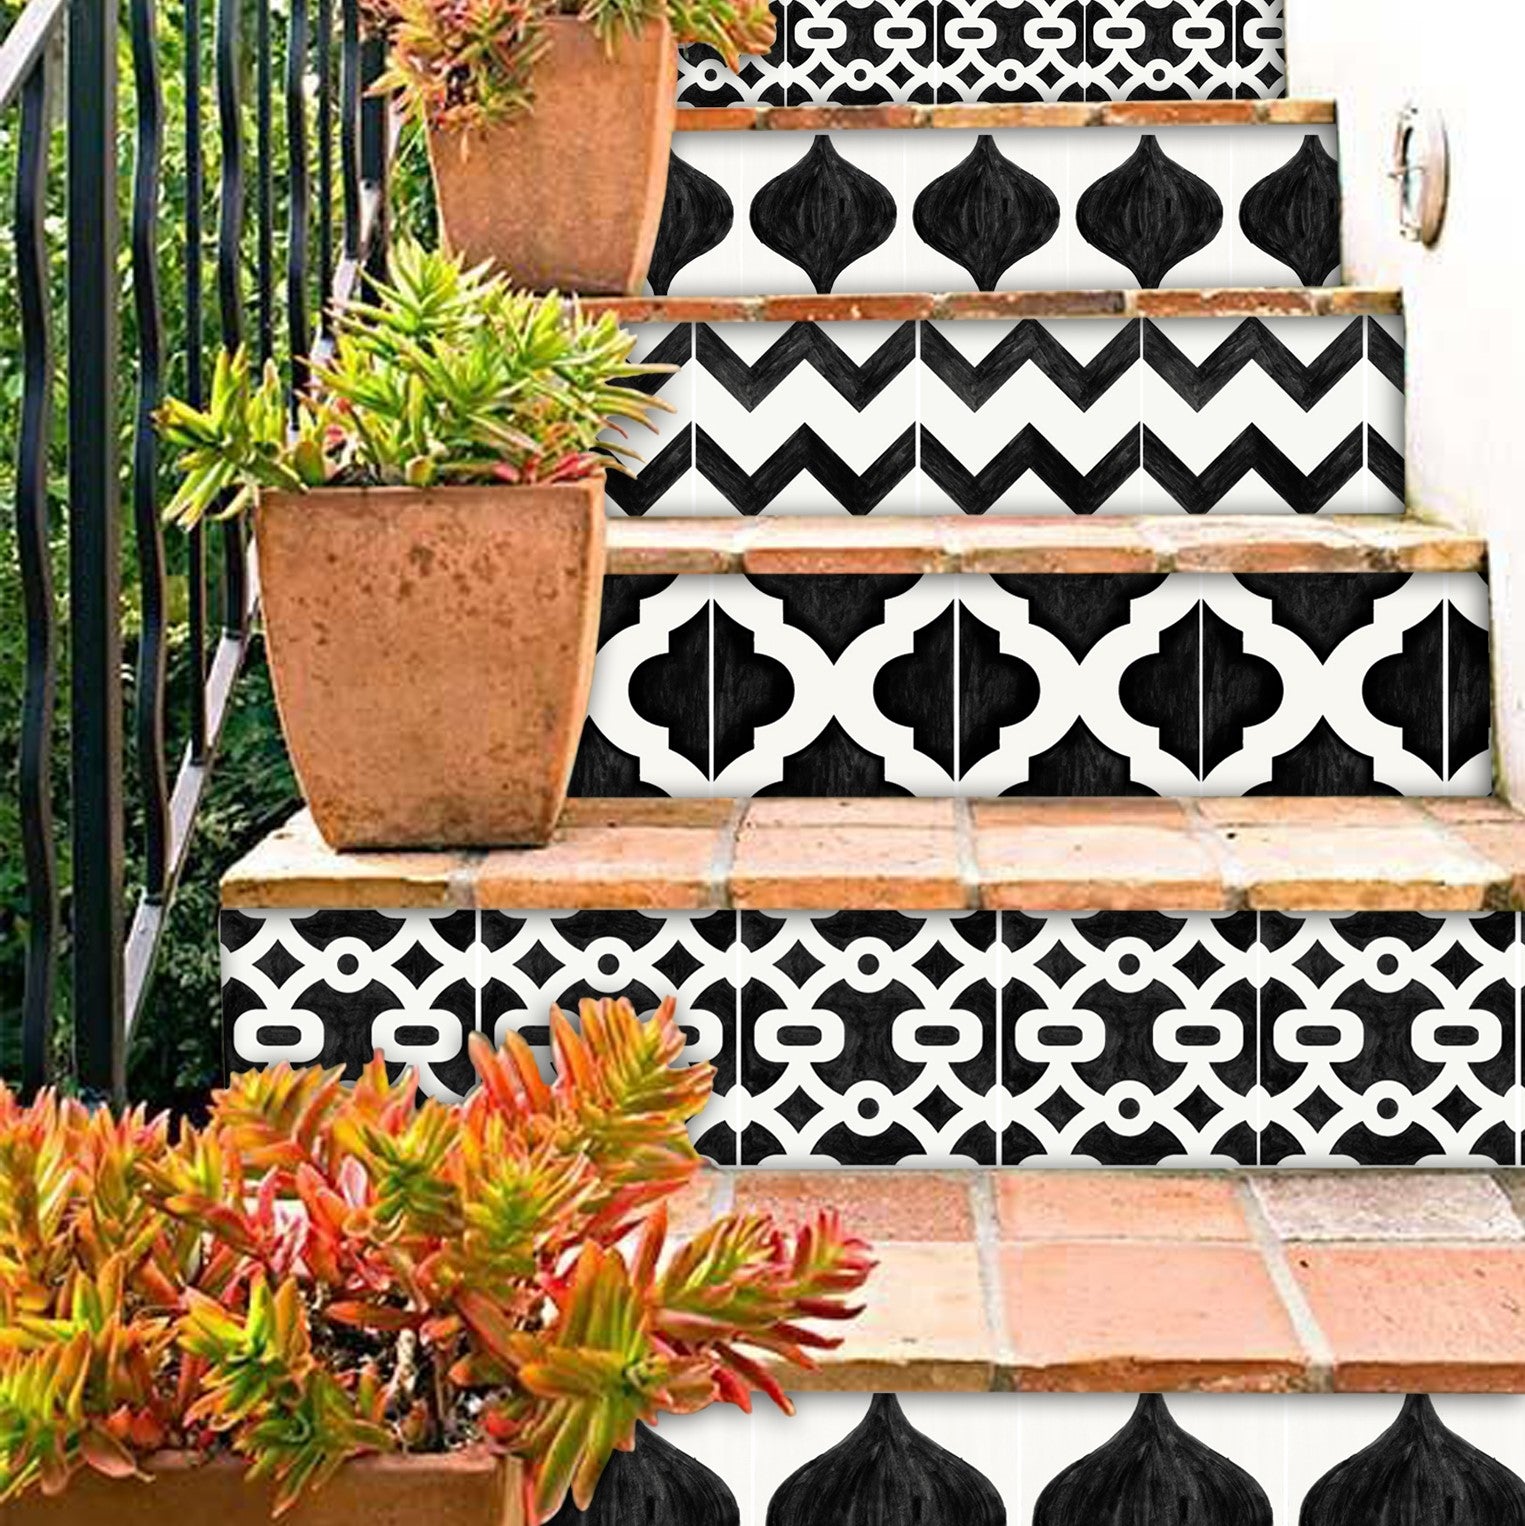 Marrakech Mix Stair Risers in Black and White